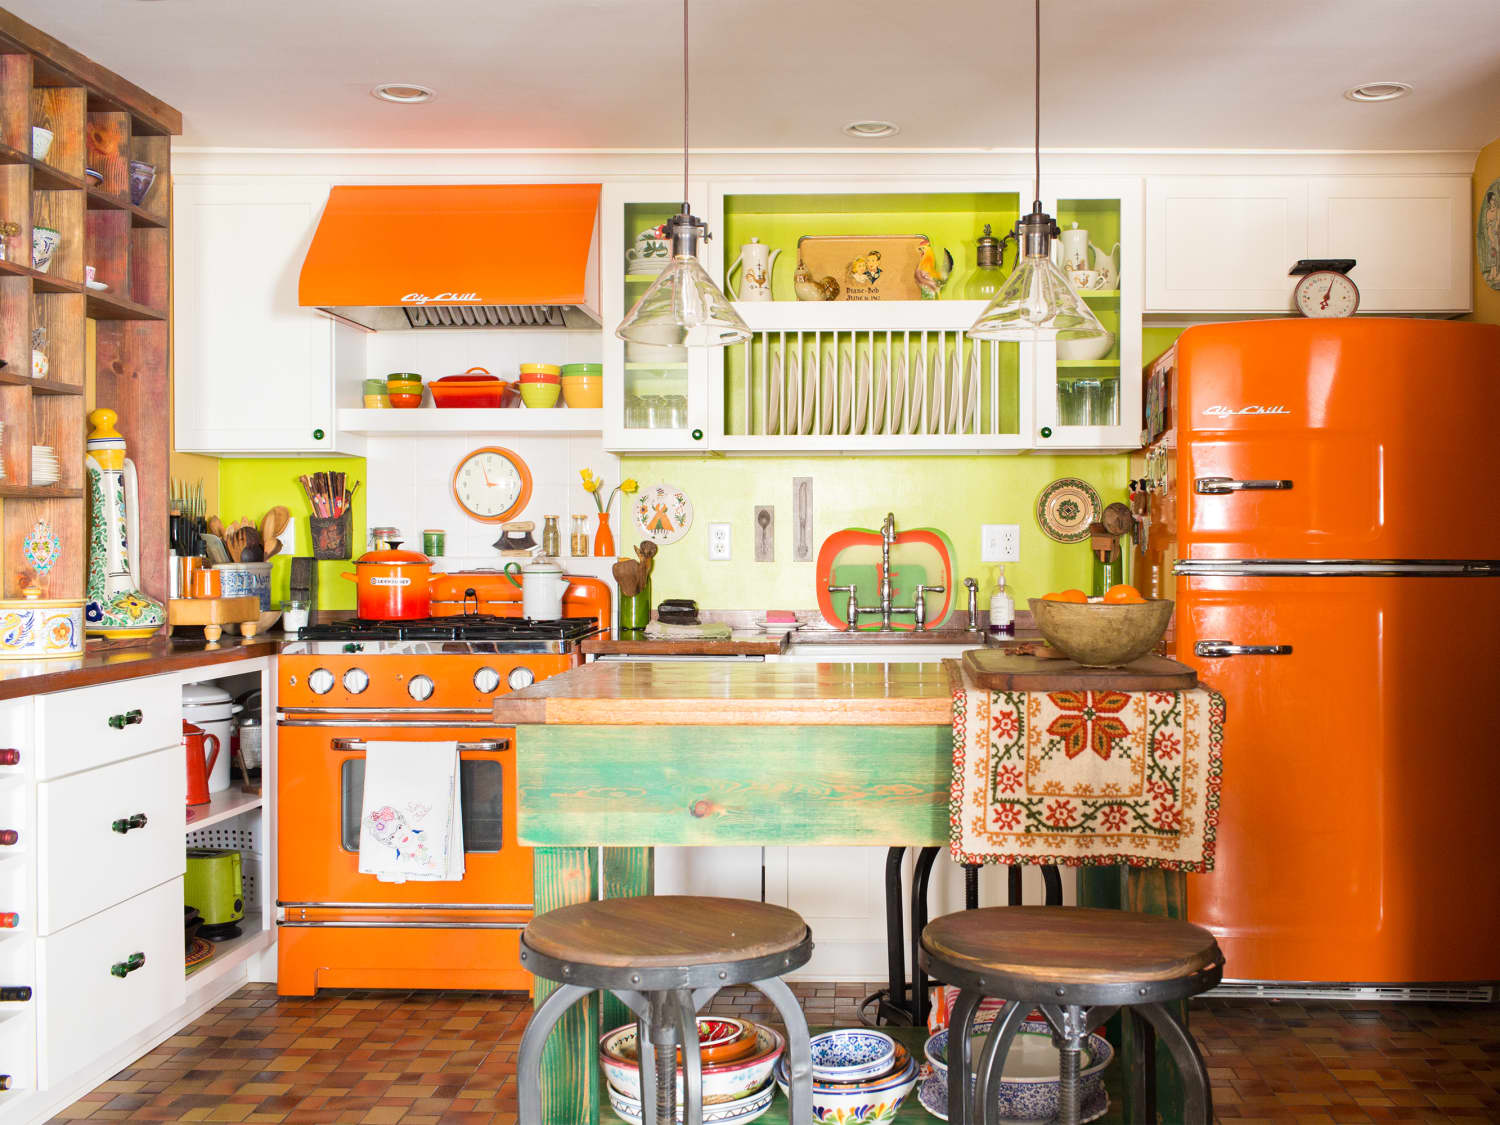 Trend Alert: 13 Kitchens with Colorful Refrigerators - Remodelista